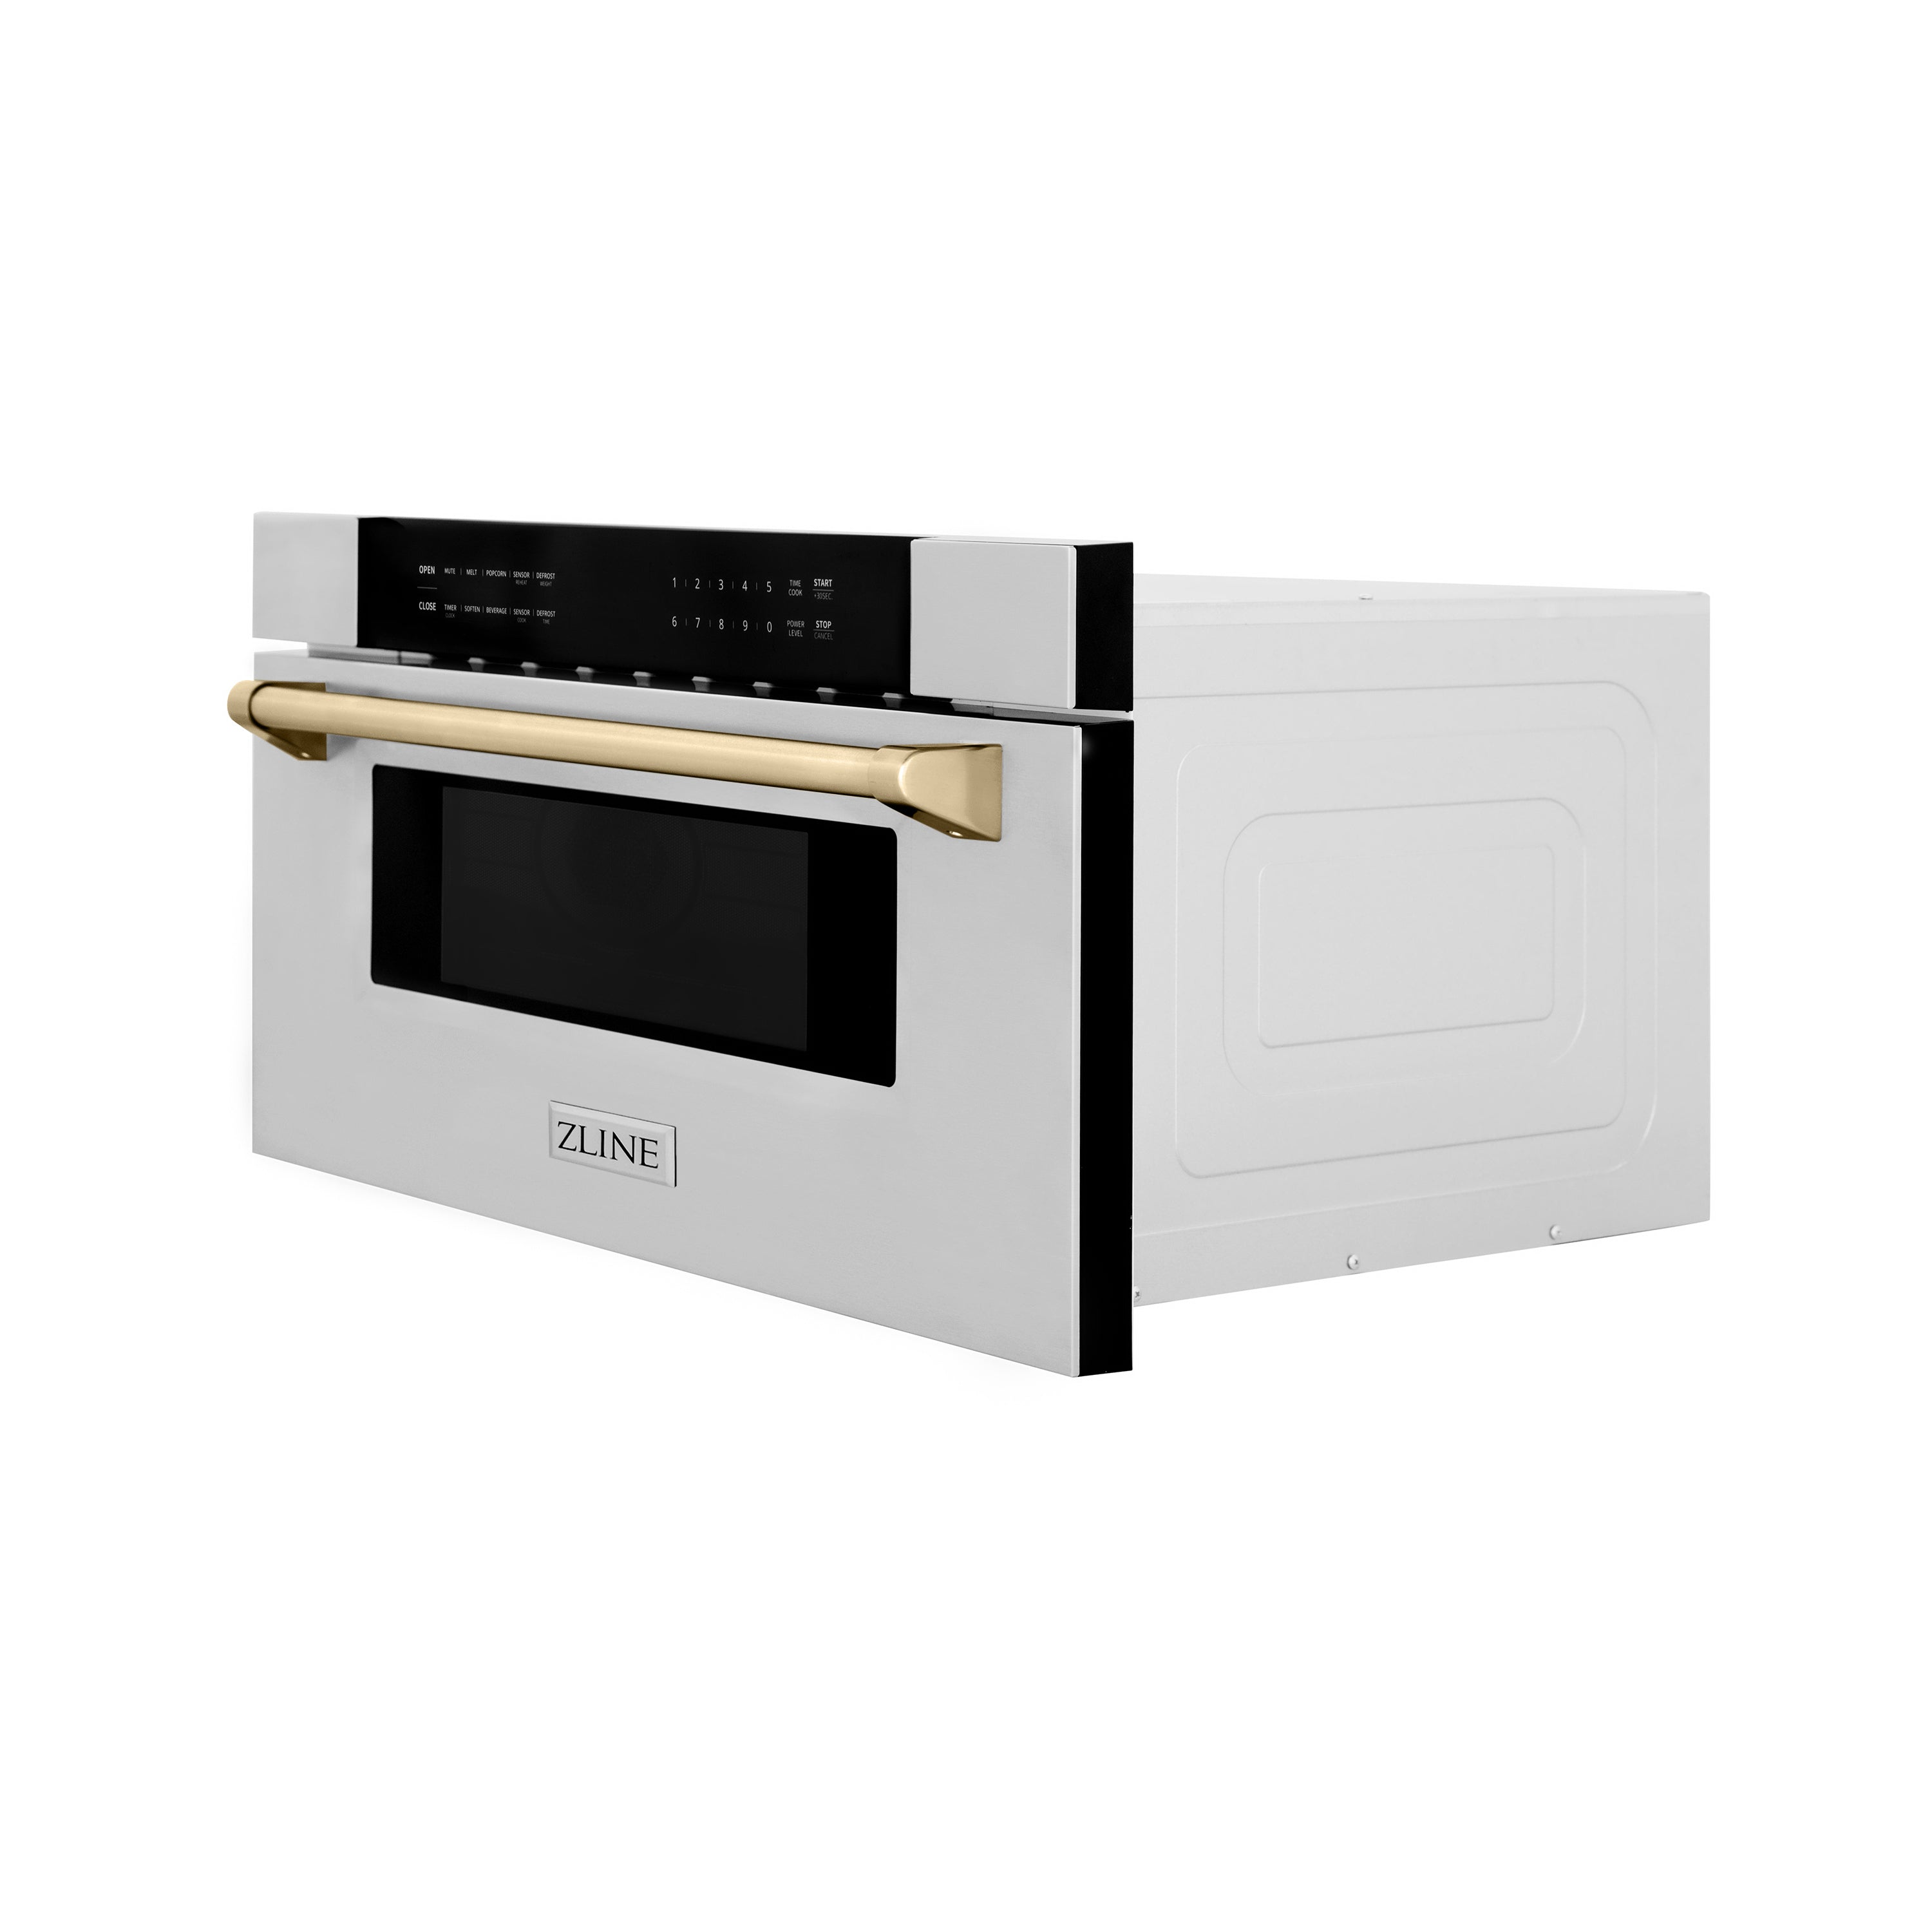 ZLINE Autograph Edition 30 in. 1.2 cu. ft. Built-In Microwave Drawer in Stainless Steel with Polished Gold Accents (MWDZ-30-G) side, closed.